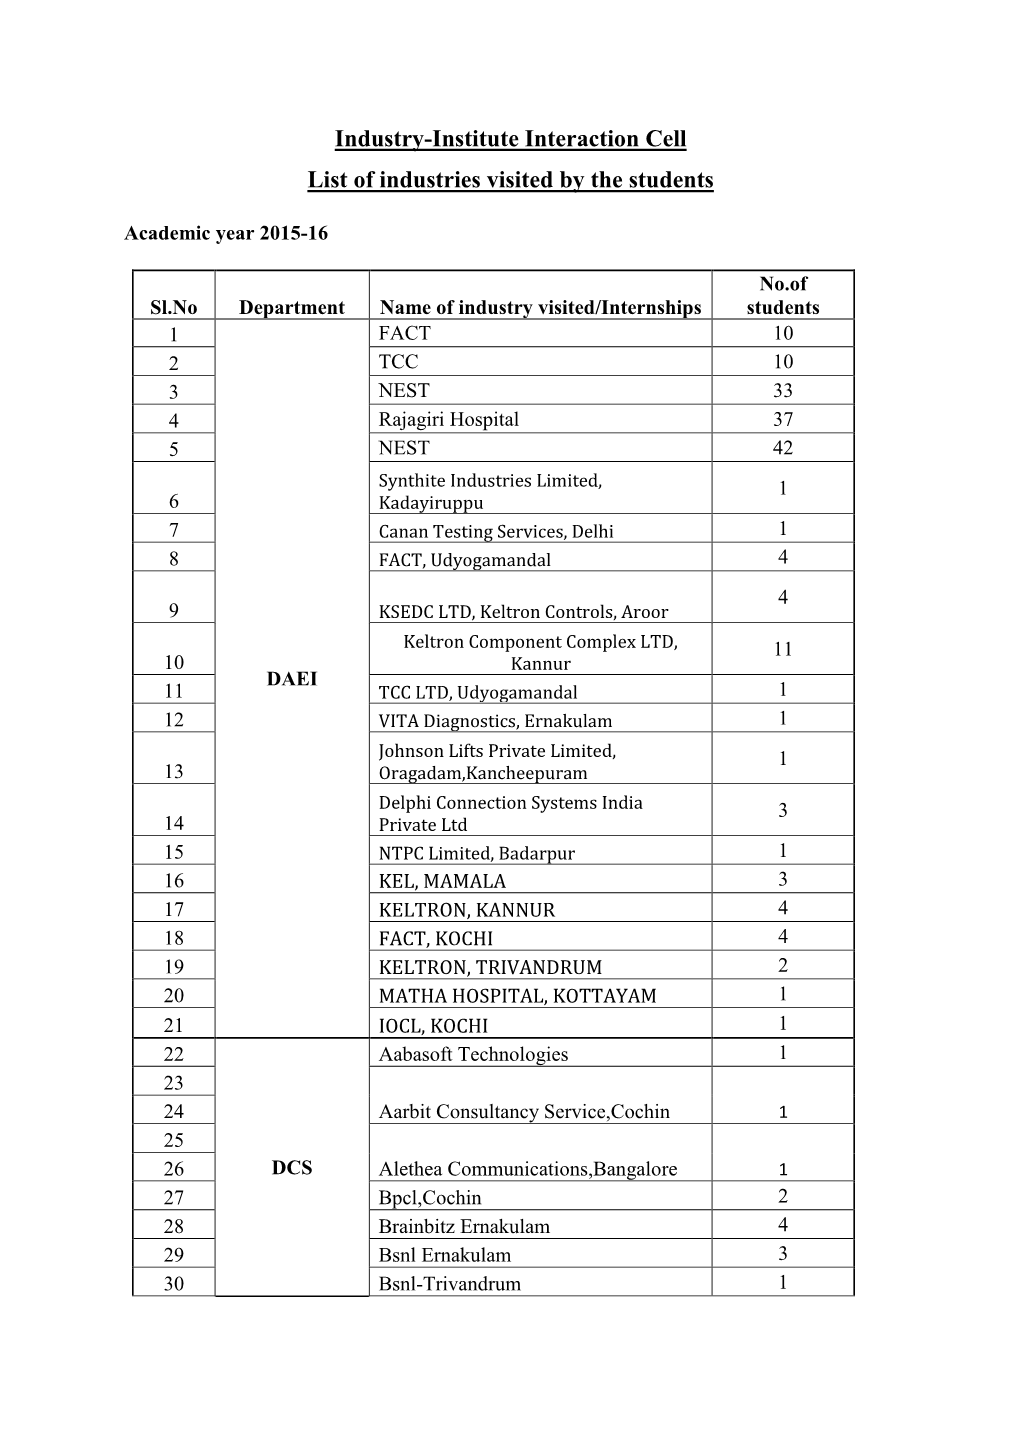 List of Industries Visited by the Students in 2015-2016